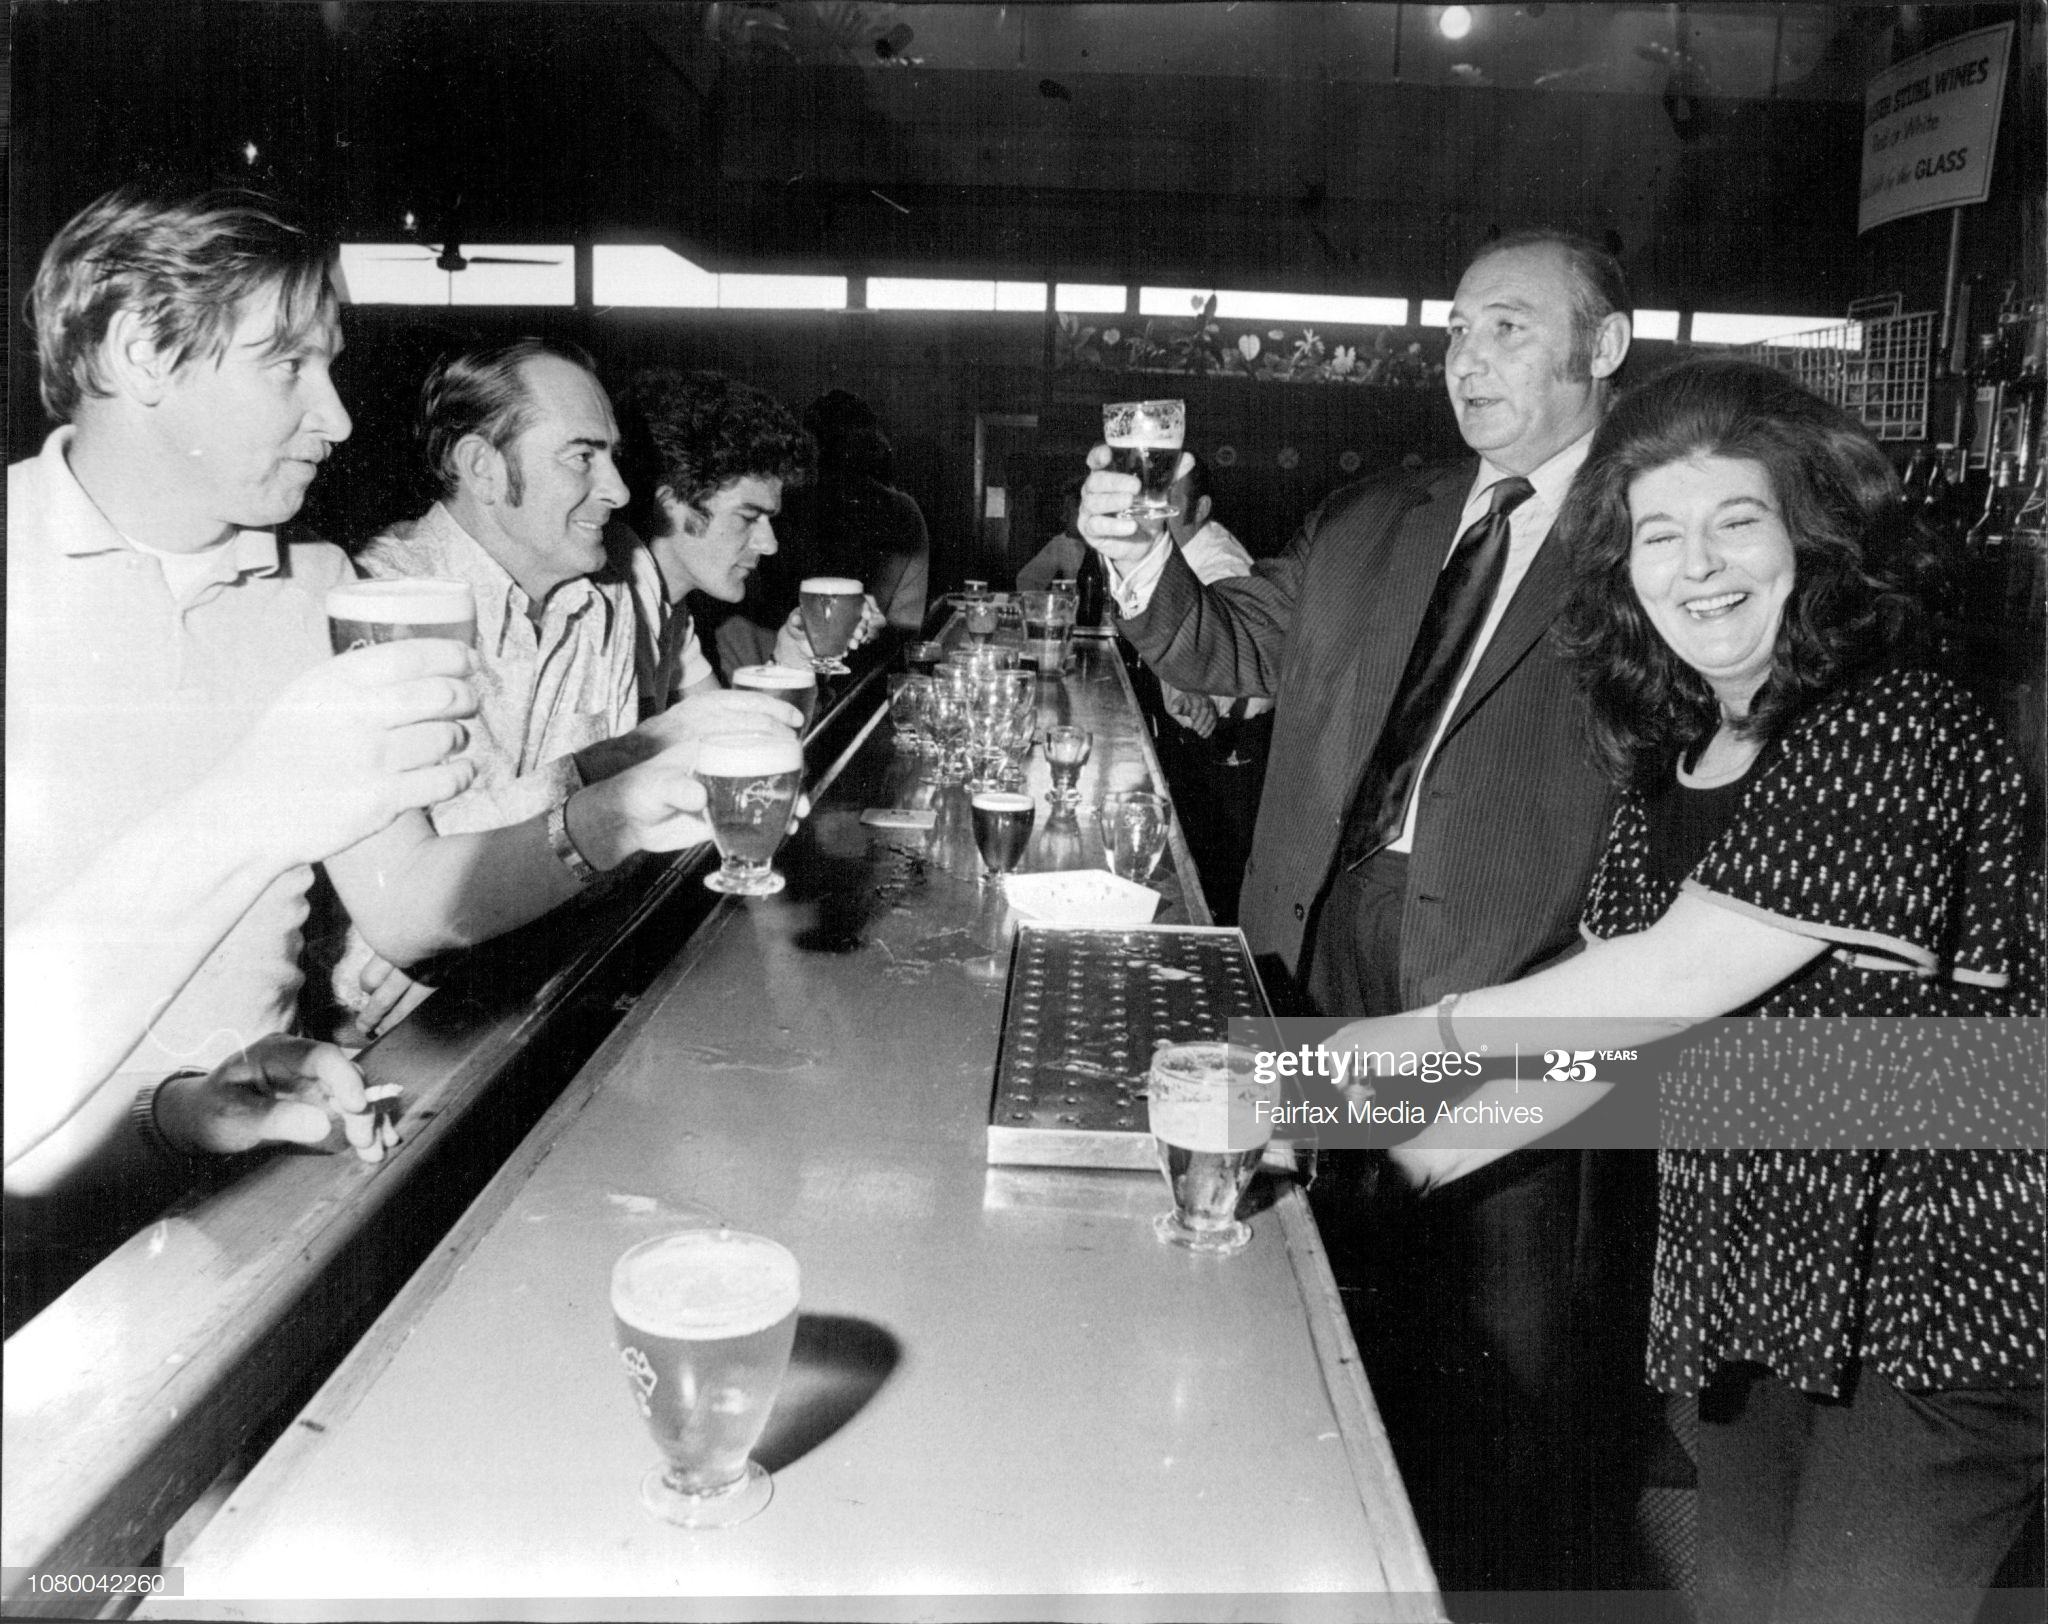 Pages Walk 1972, Publicans of the “Victoria” Pages Walk, John & June Sherriff in the Carlton Rex Hotel, Sydney, part of their prize as winners of the London Evening standard's annual London Pub of year.  X.png